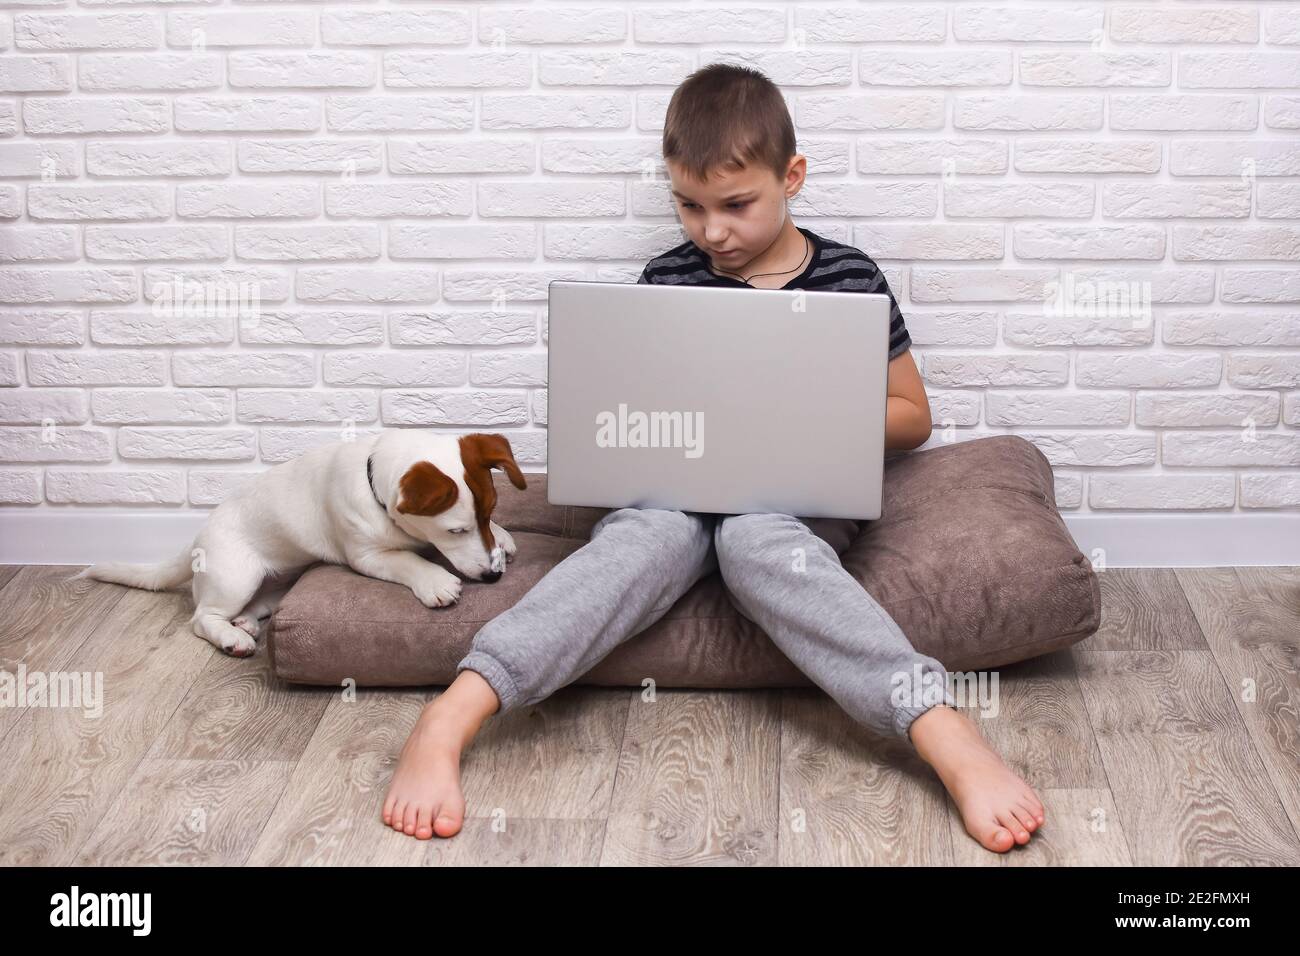 A 6-7-year-old boy is sitting at a laptop. A Jack Russell Terrier dog plays nearby. Against a brick wall. Stock Photo